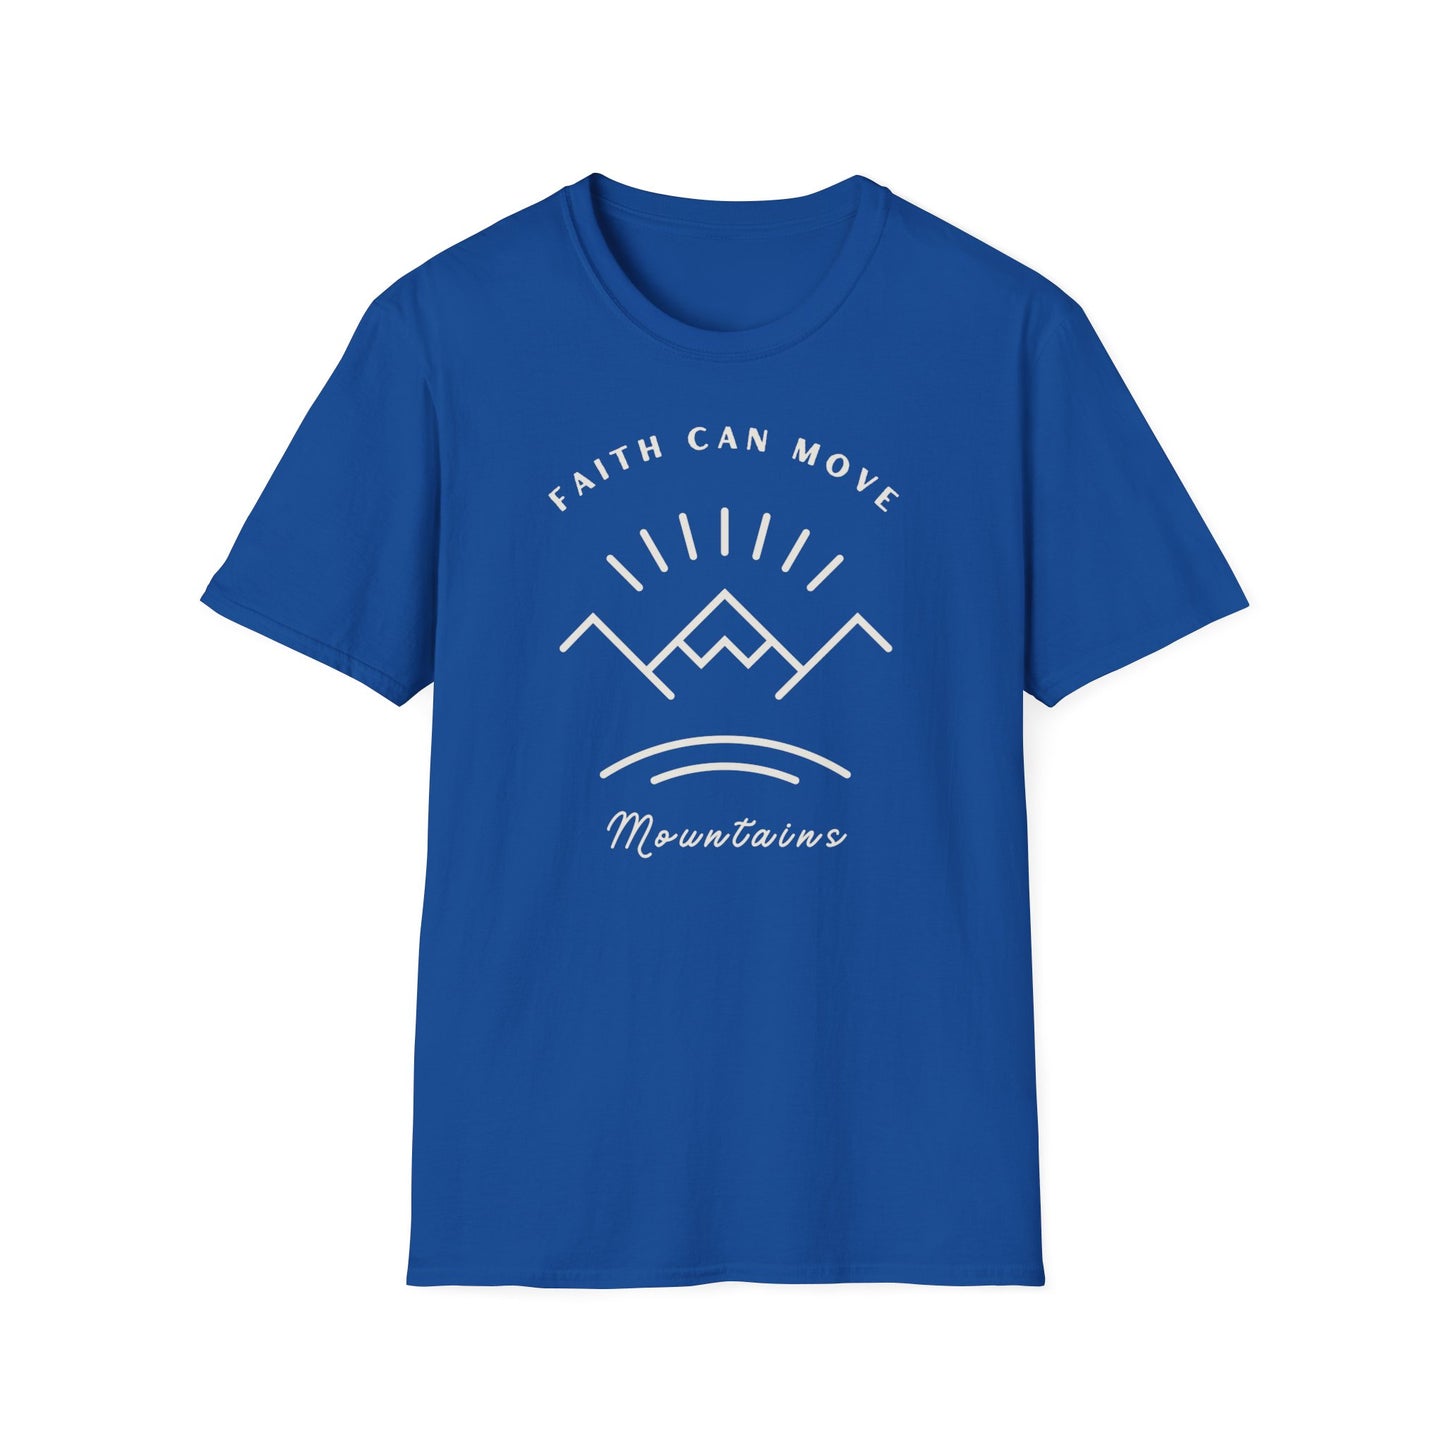 FAITH CAN MOVE MOUNTAINS Softstyle T-Shirt - (many color options)